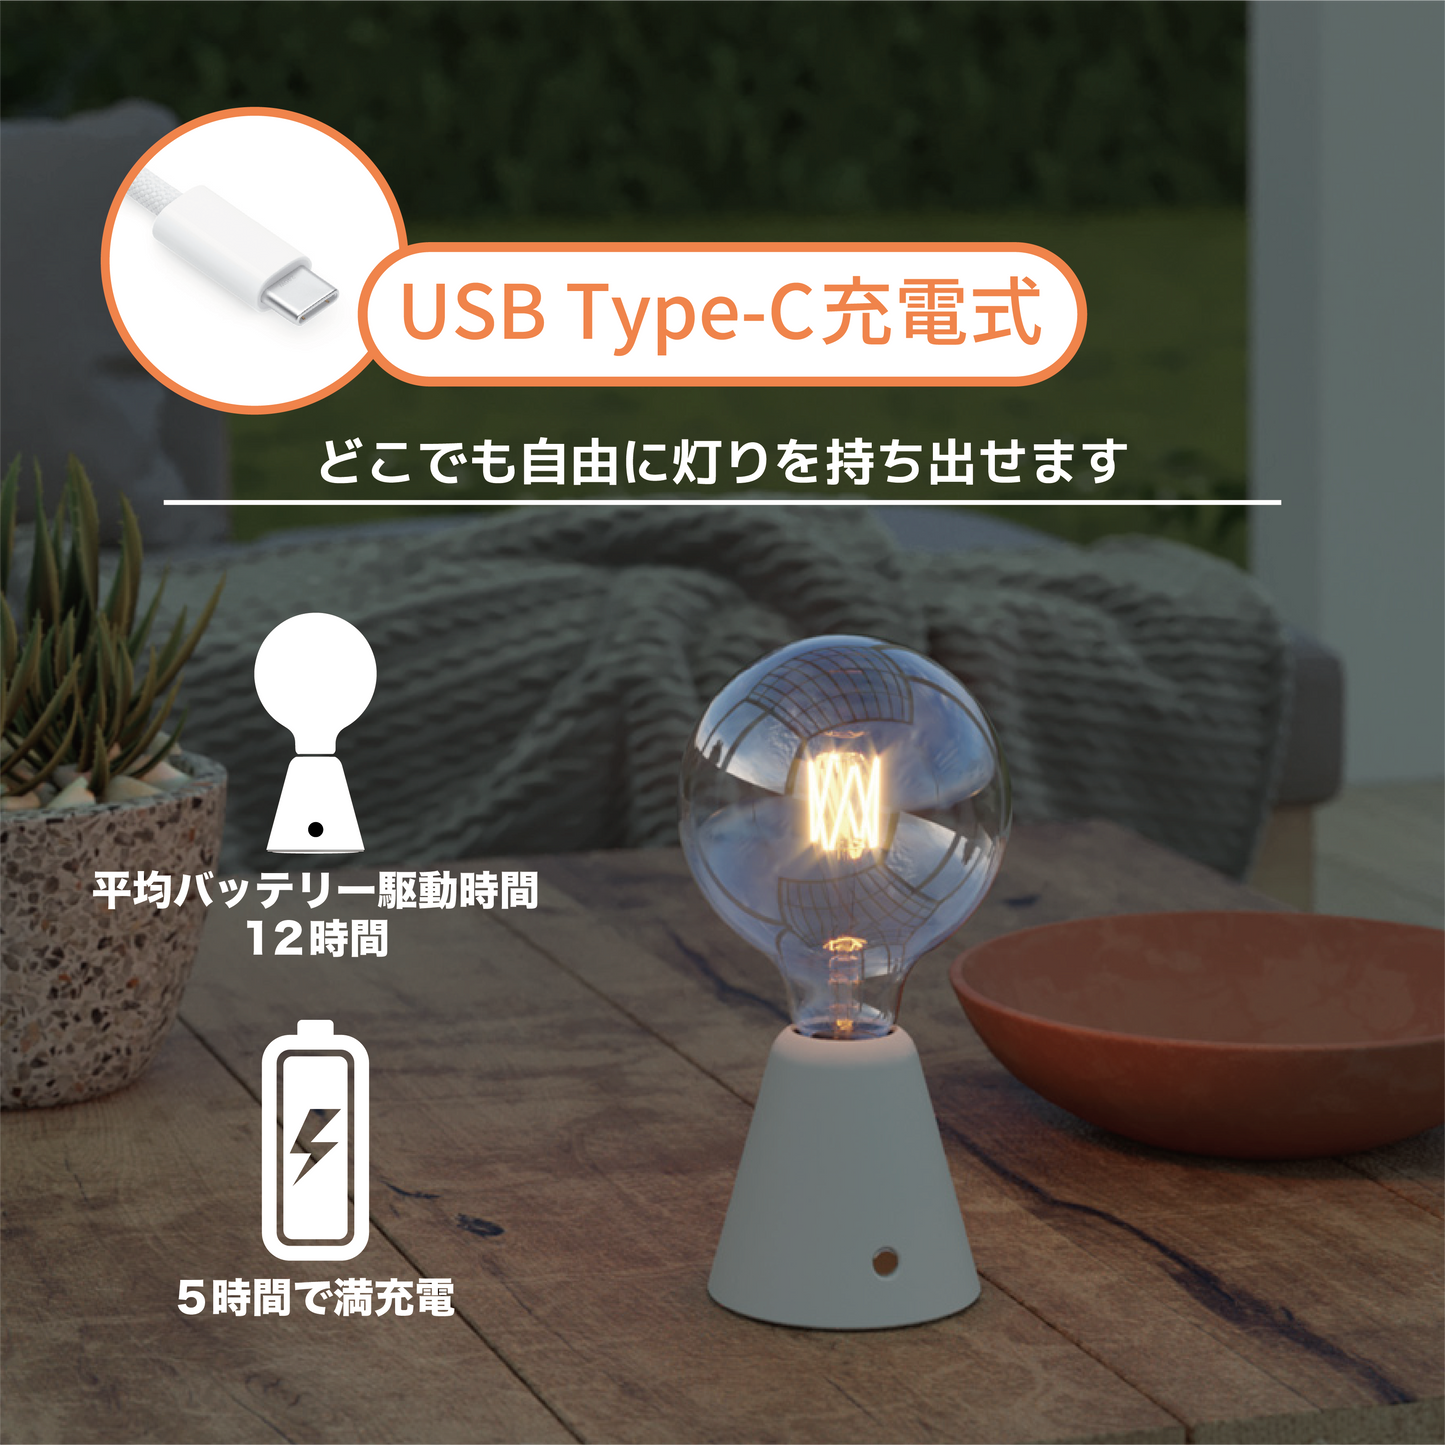 CABLESS01 LEDワイヤレスランプ G125 ライトバルブセット Neutral